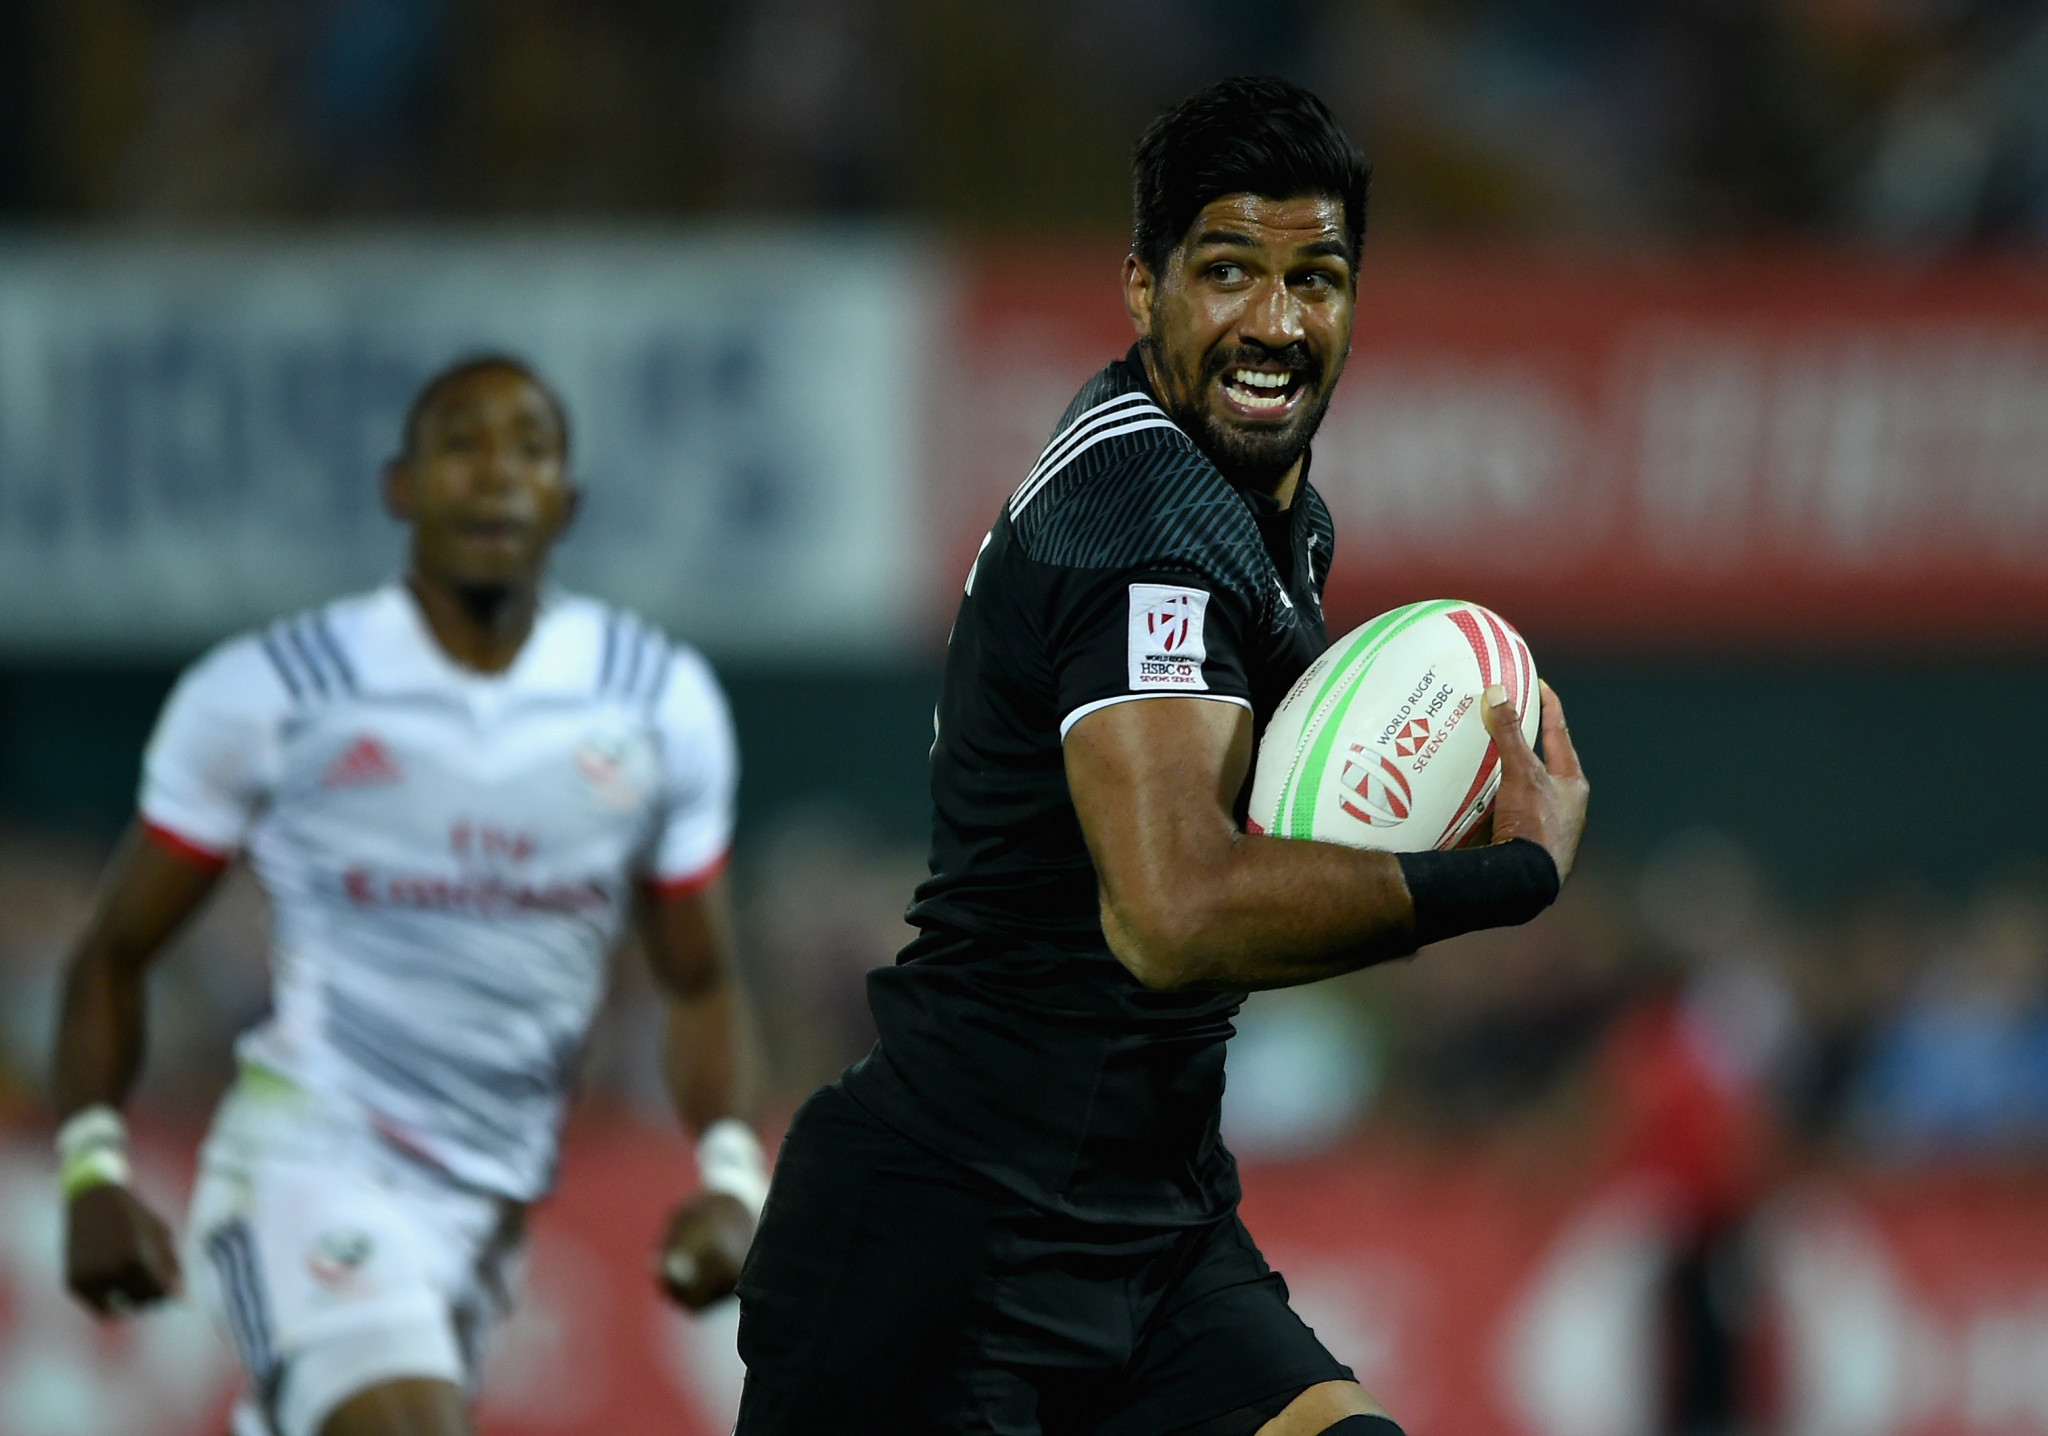 New Zealand beat United States to win World Rugby Men's Sevens Series in Dubai